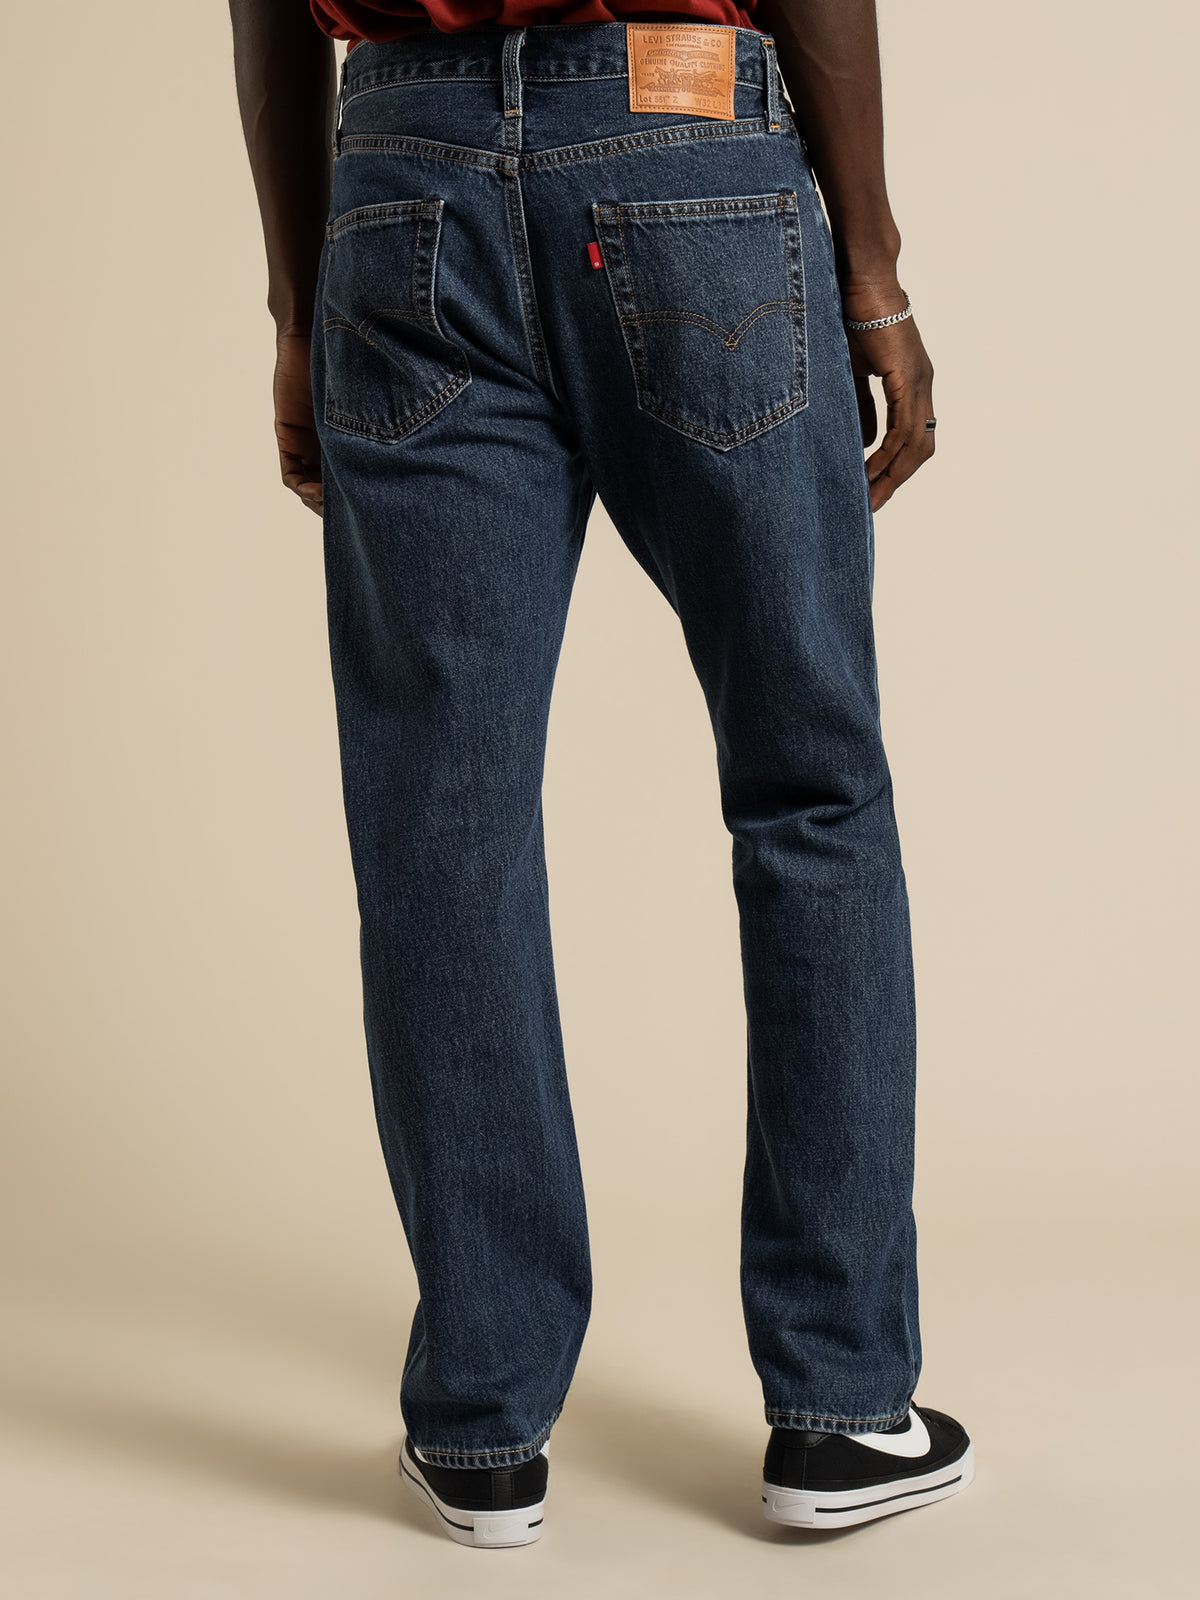 551Z Authentic Straight Leg Jeans in Rubber Worm